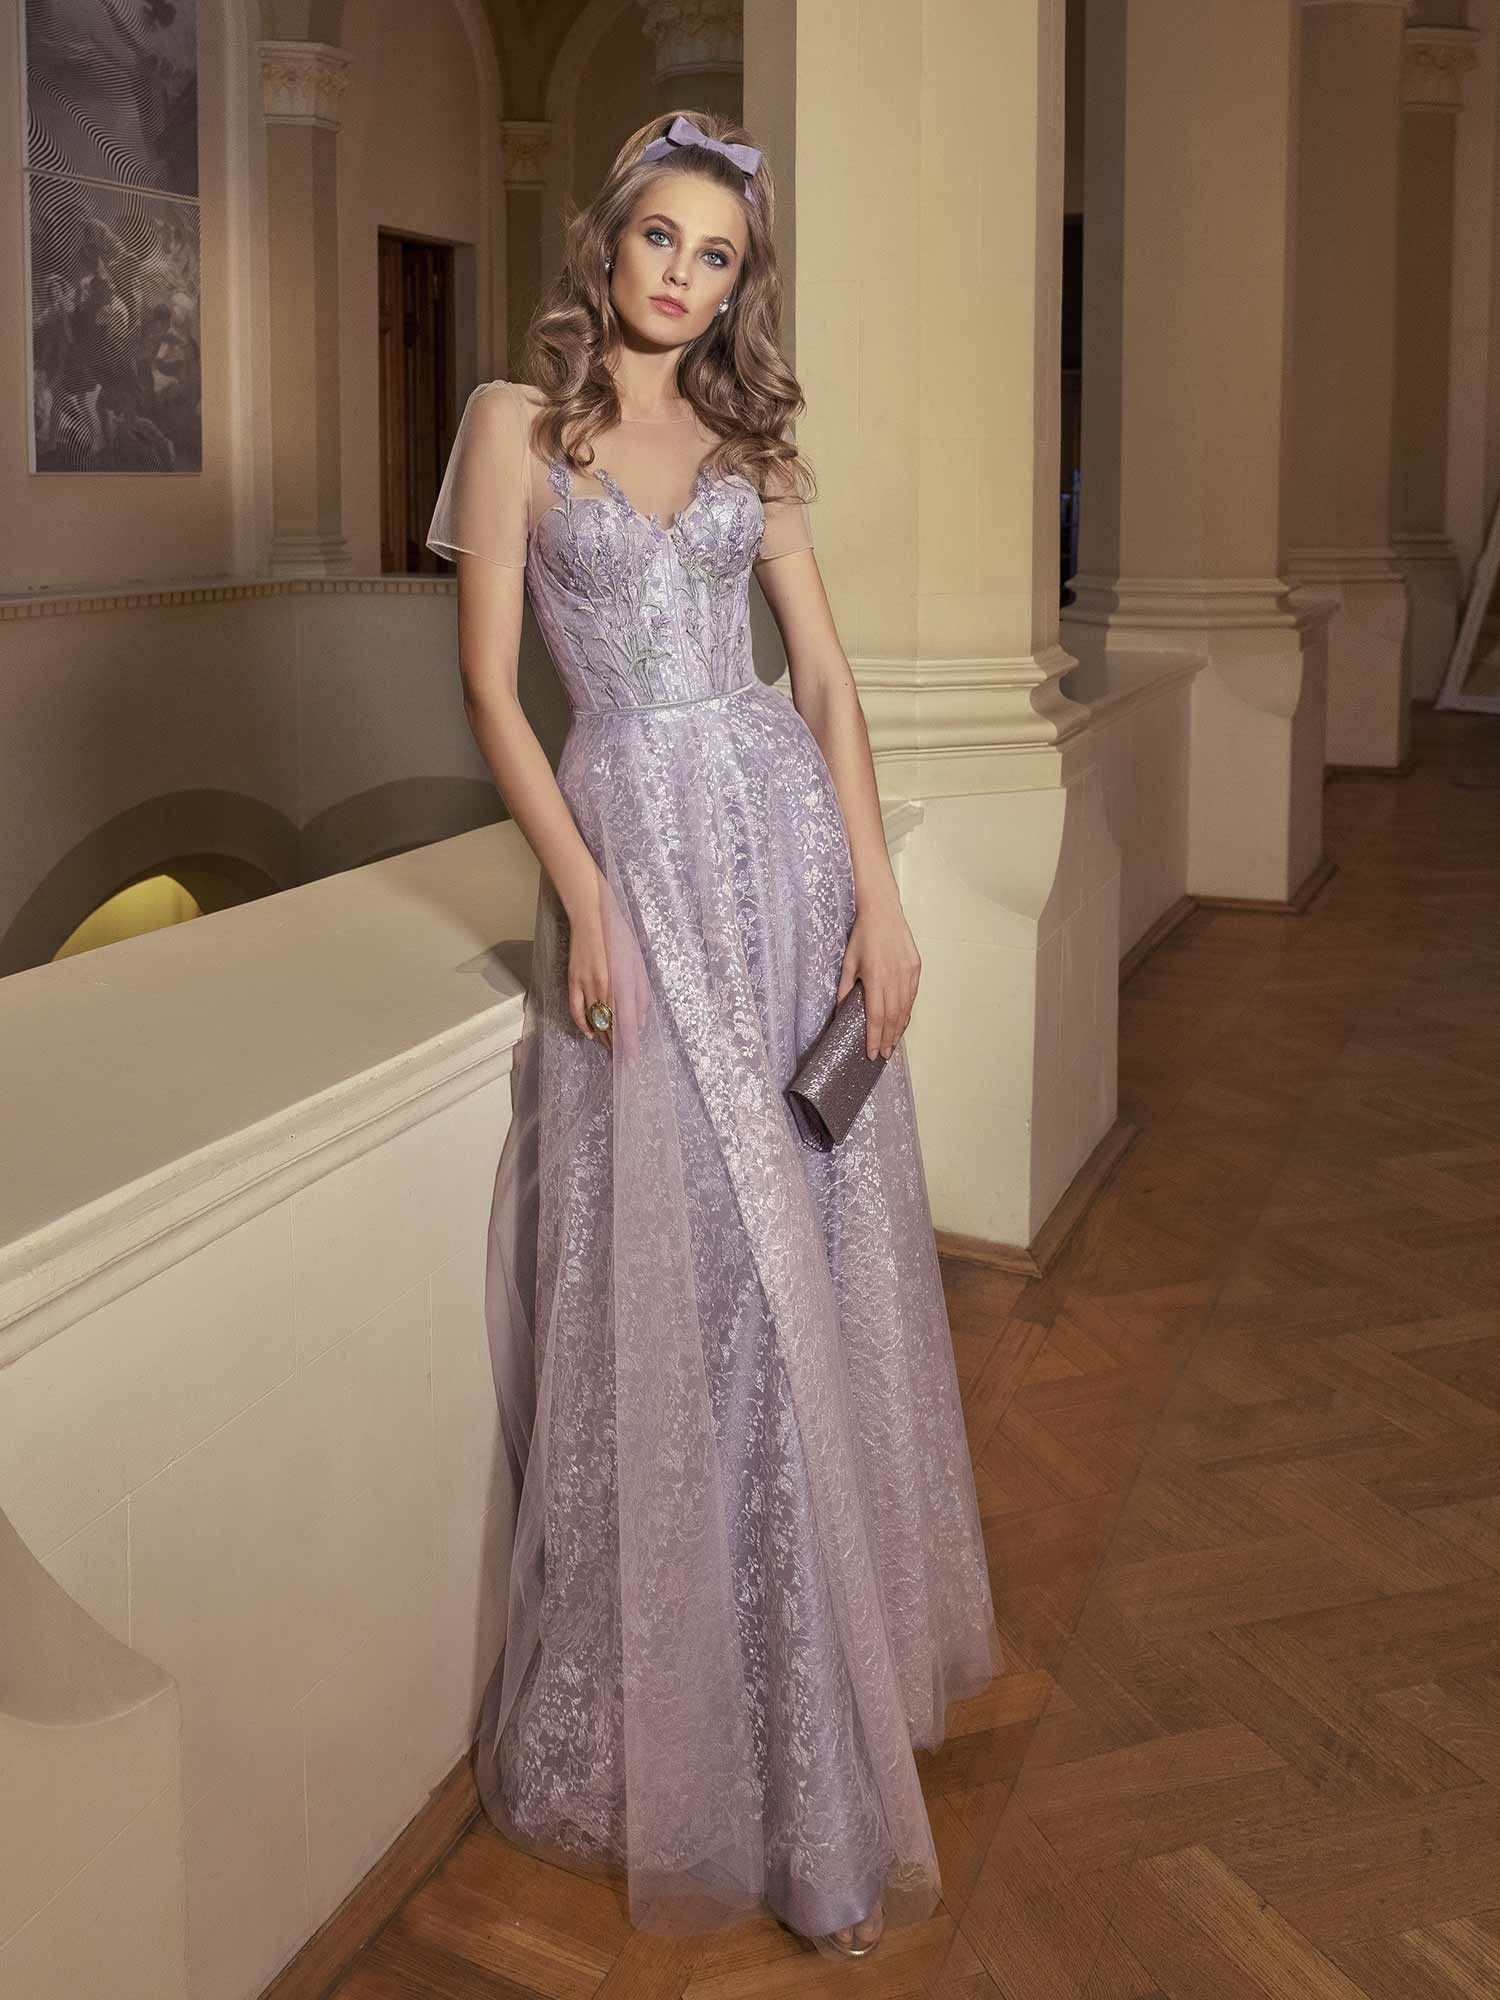 Style #511, maxi dress with sweetheart bodice and floral embroidery, available in powder, lilac, gray, ivory